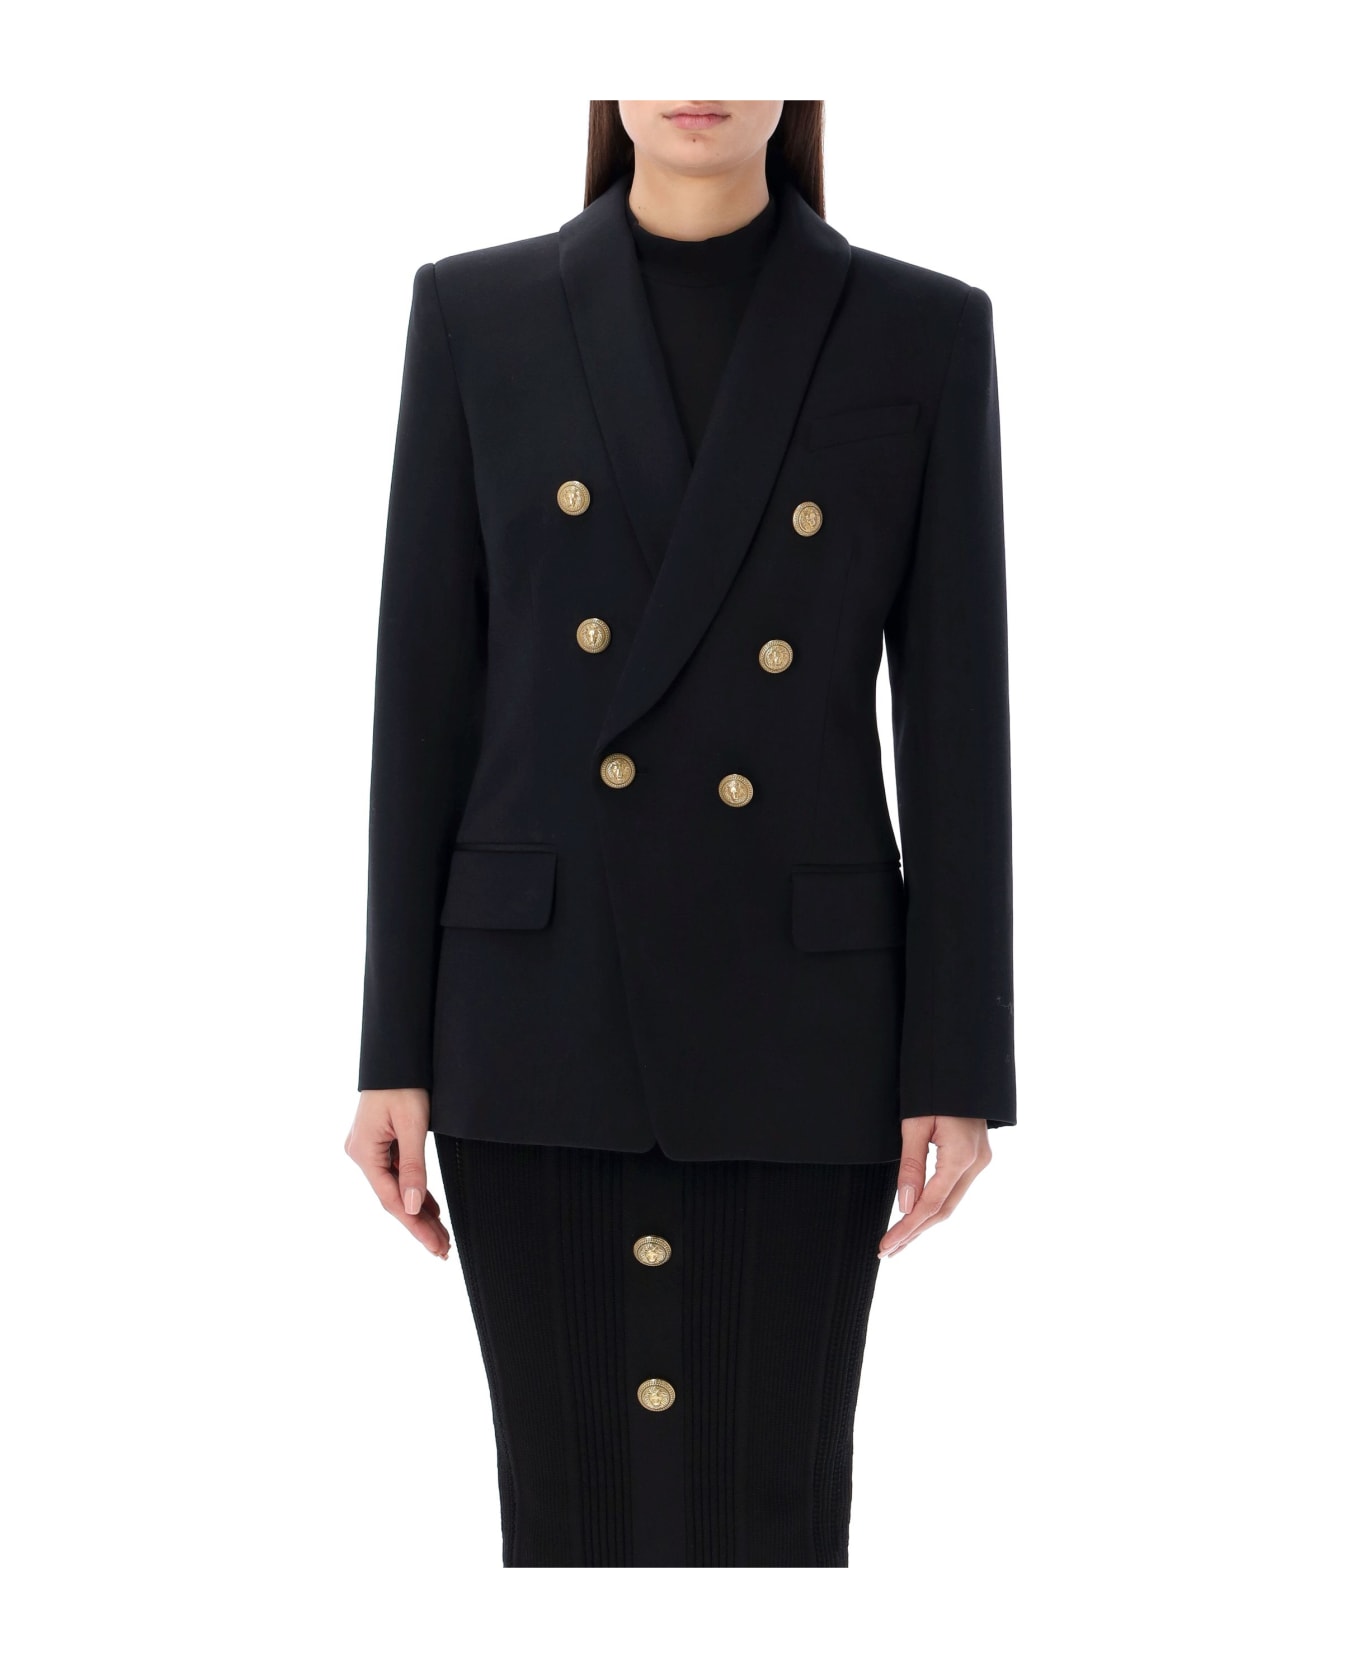 Balmain Double-breasted Jacket With Shaped Cut - BLACK